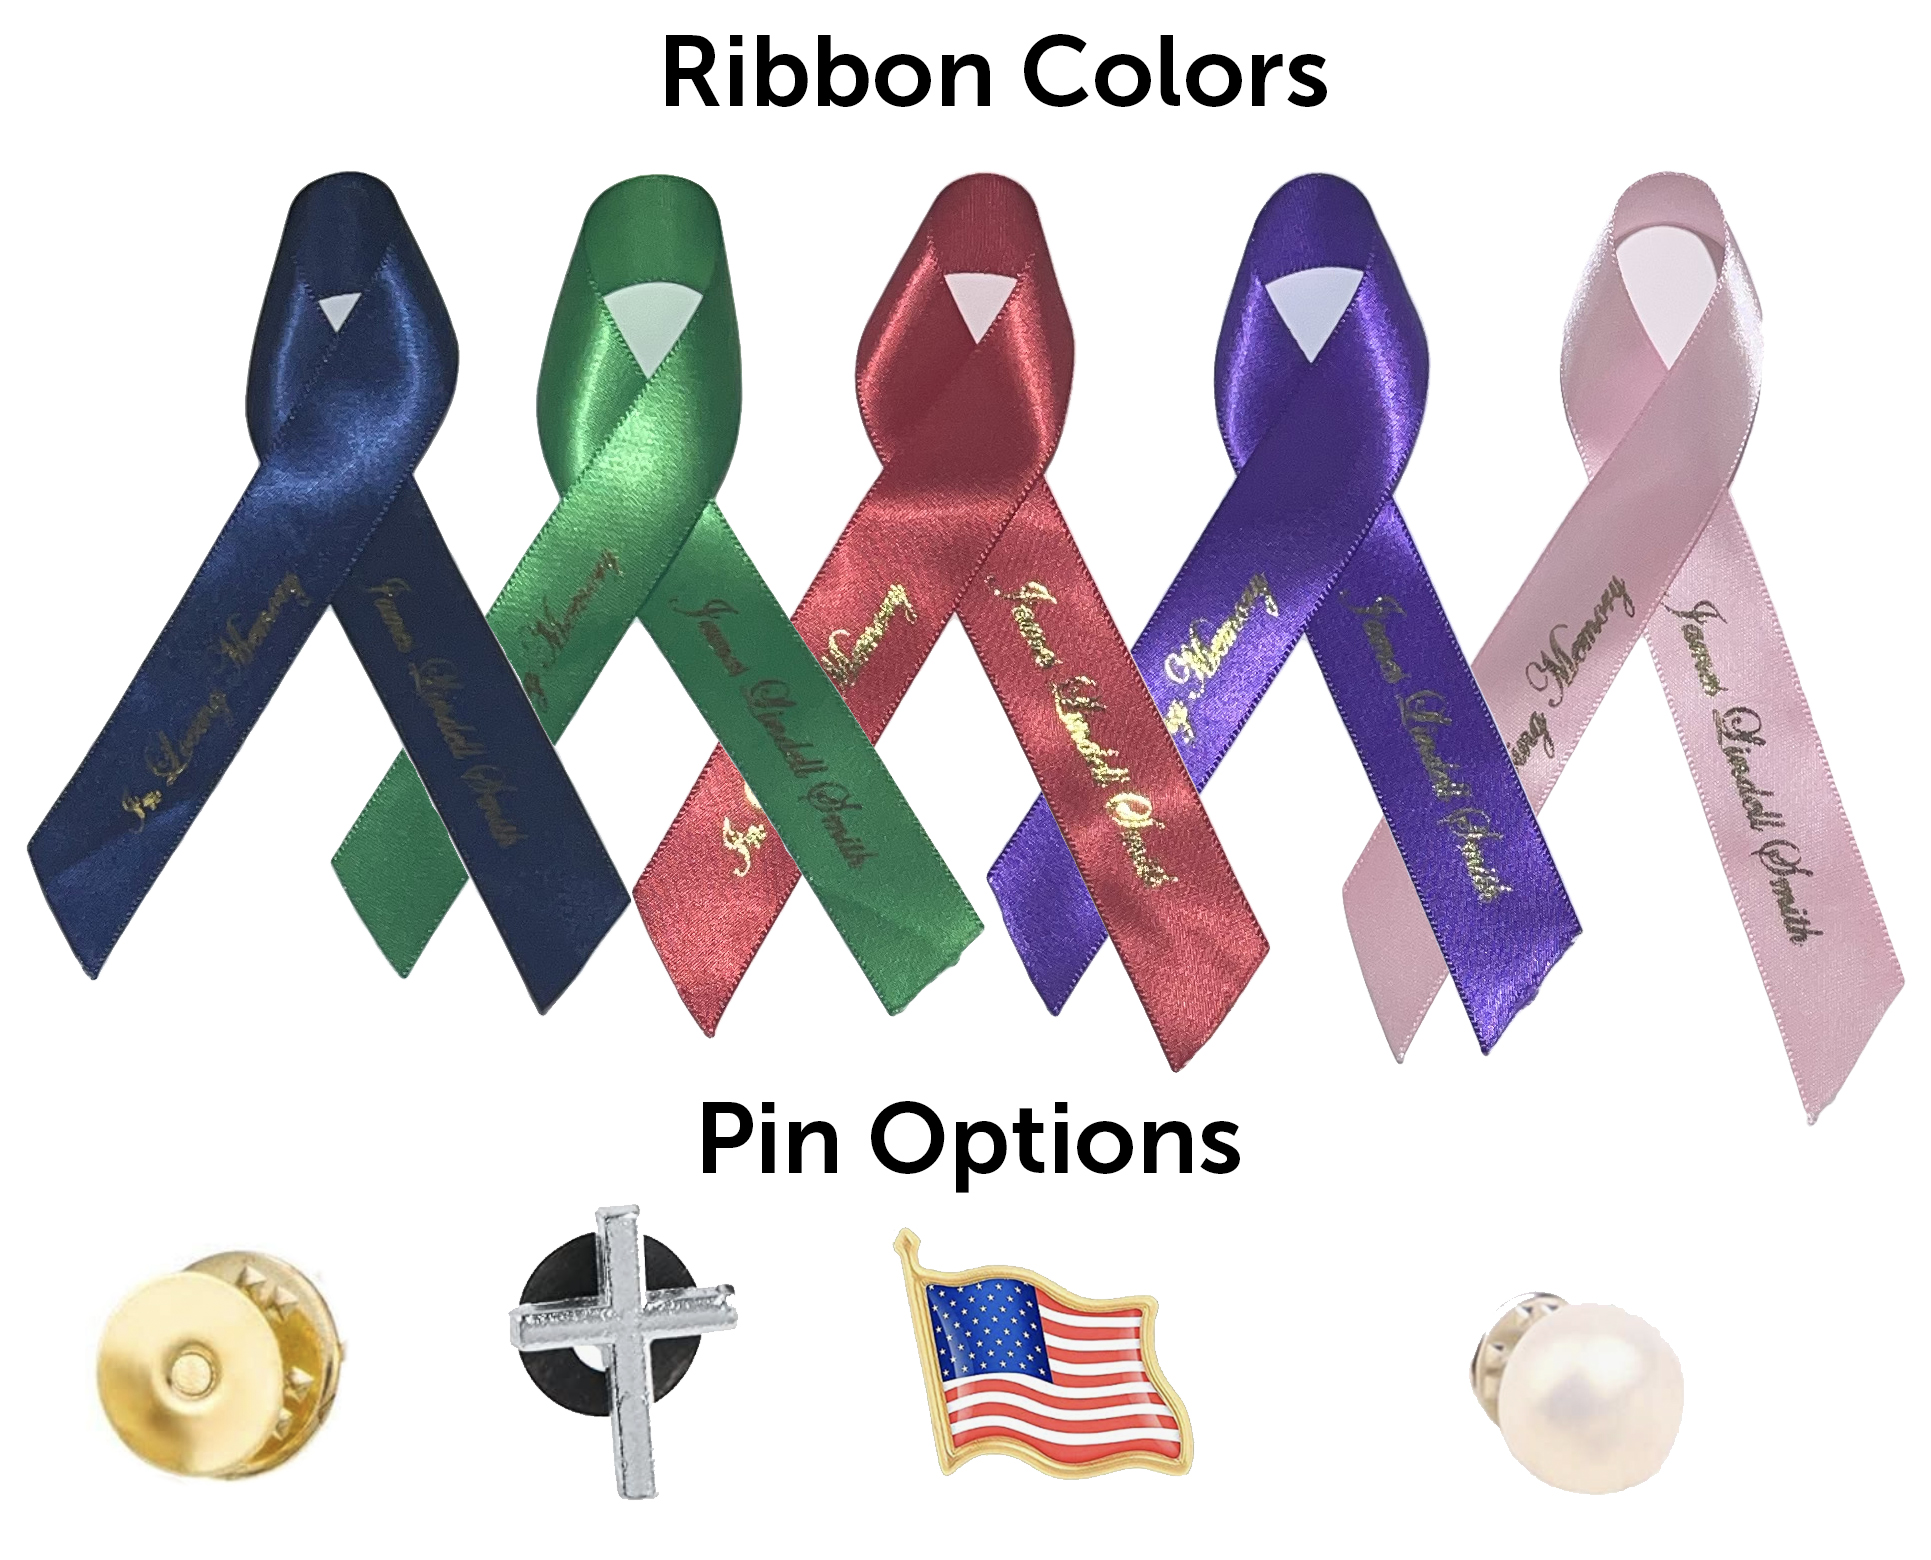 Memorial ribbon orders placed before 12pm CST M-F print and ship same day. 